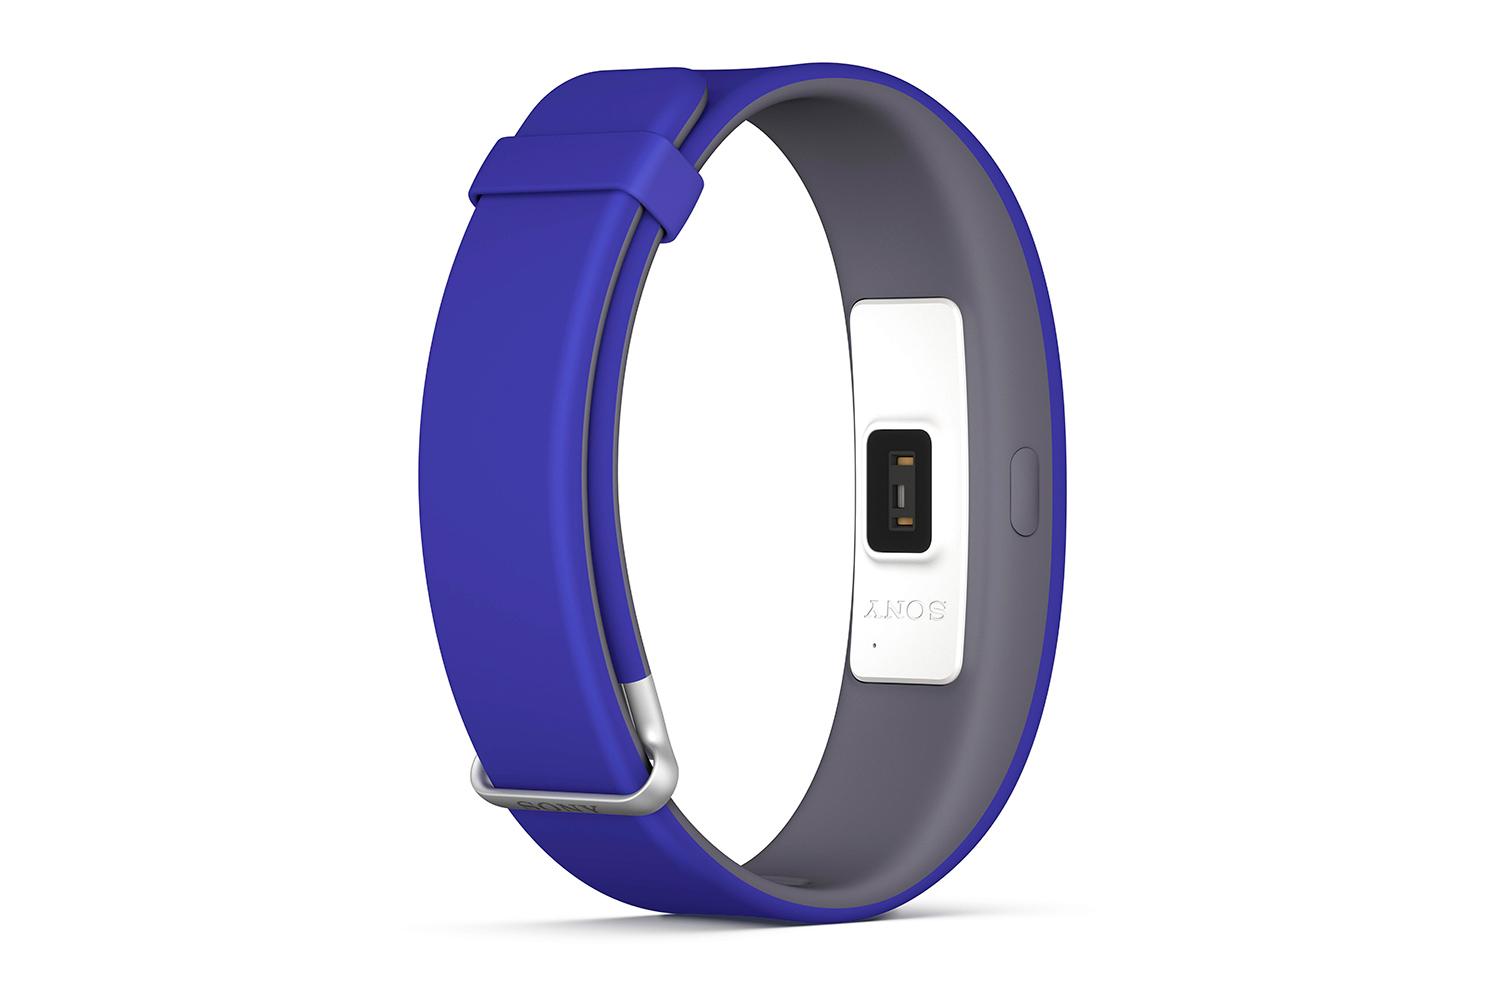 Sony SmartBand 2: News, Features, Price, Release Date | Digital Trends